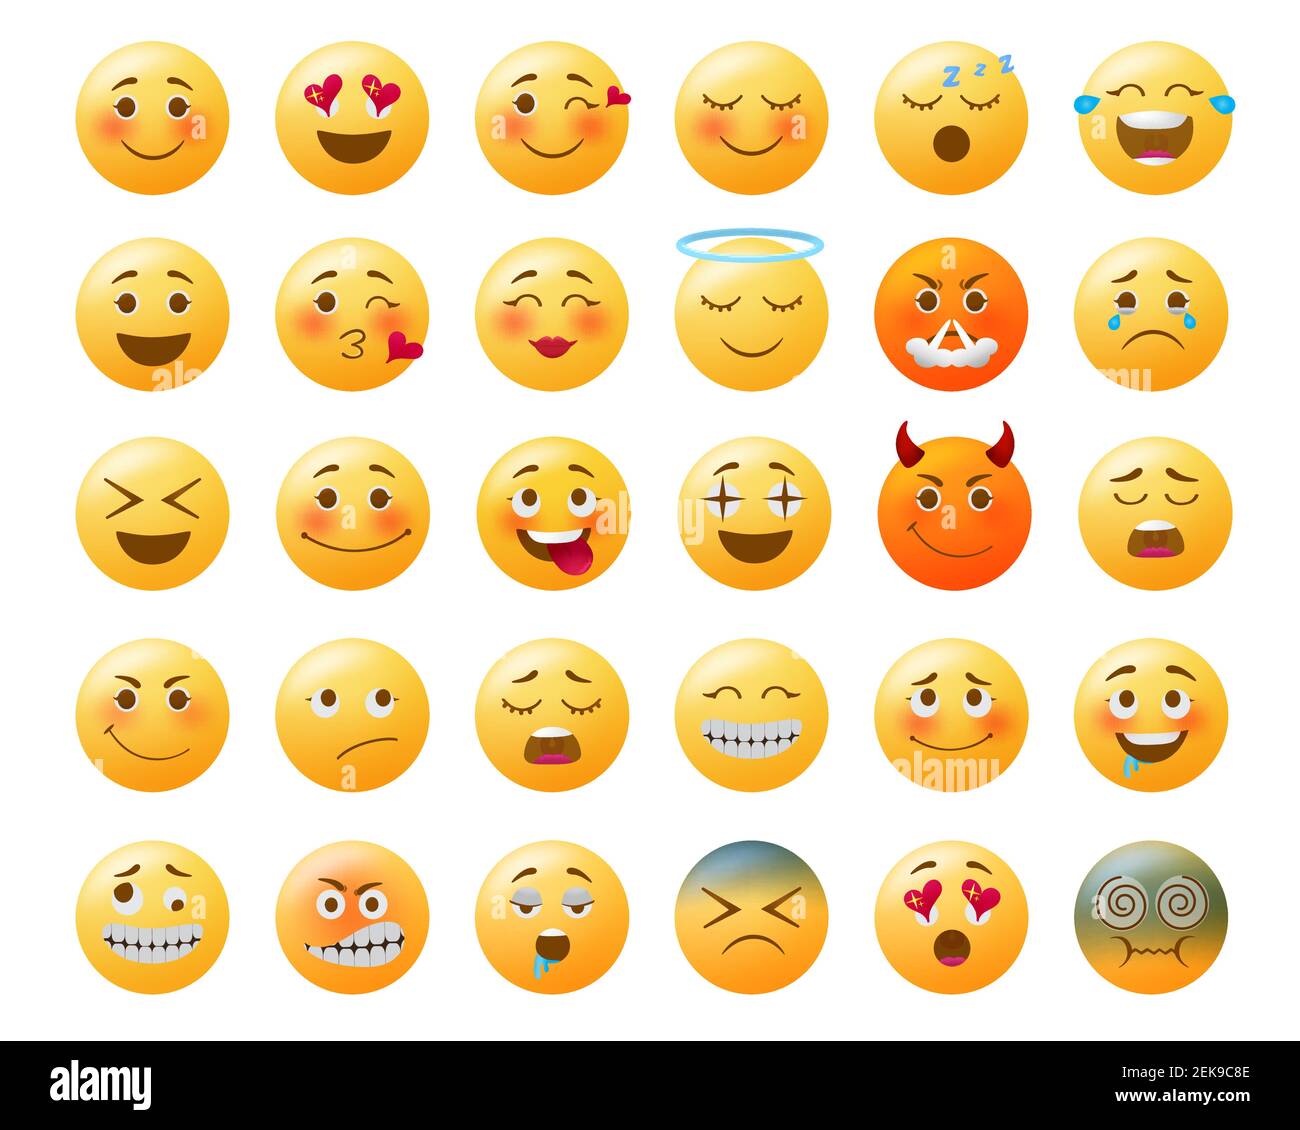 Smileys emoticon vector set. Smiley yellow emoji with happy, in love, sad and angry facial expressions and emotions for icon collection design. Stock Vector